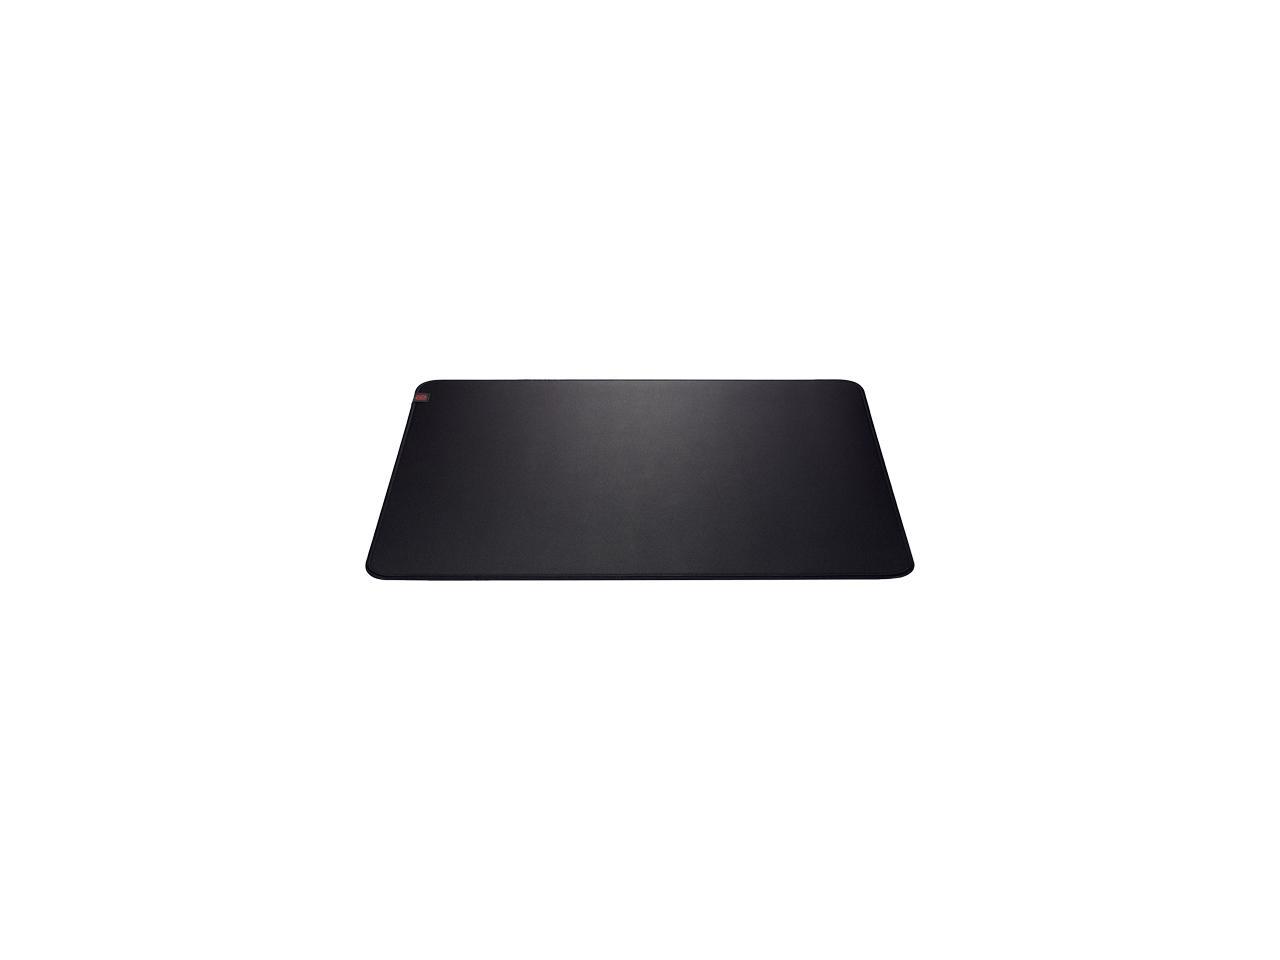 Benq Zowie G Sr Large Mouse Pad For Esports Smooth Cloth Soft Rubber Base 100 Flat Stitched Edge Newegg Com